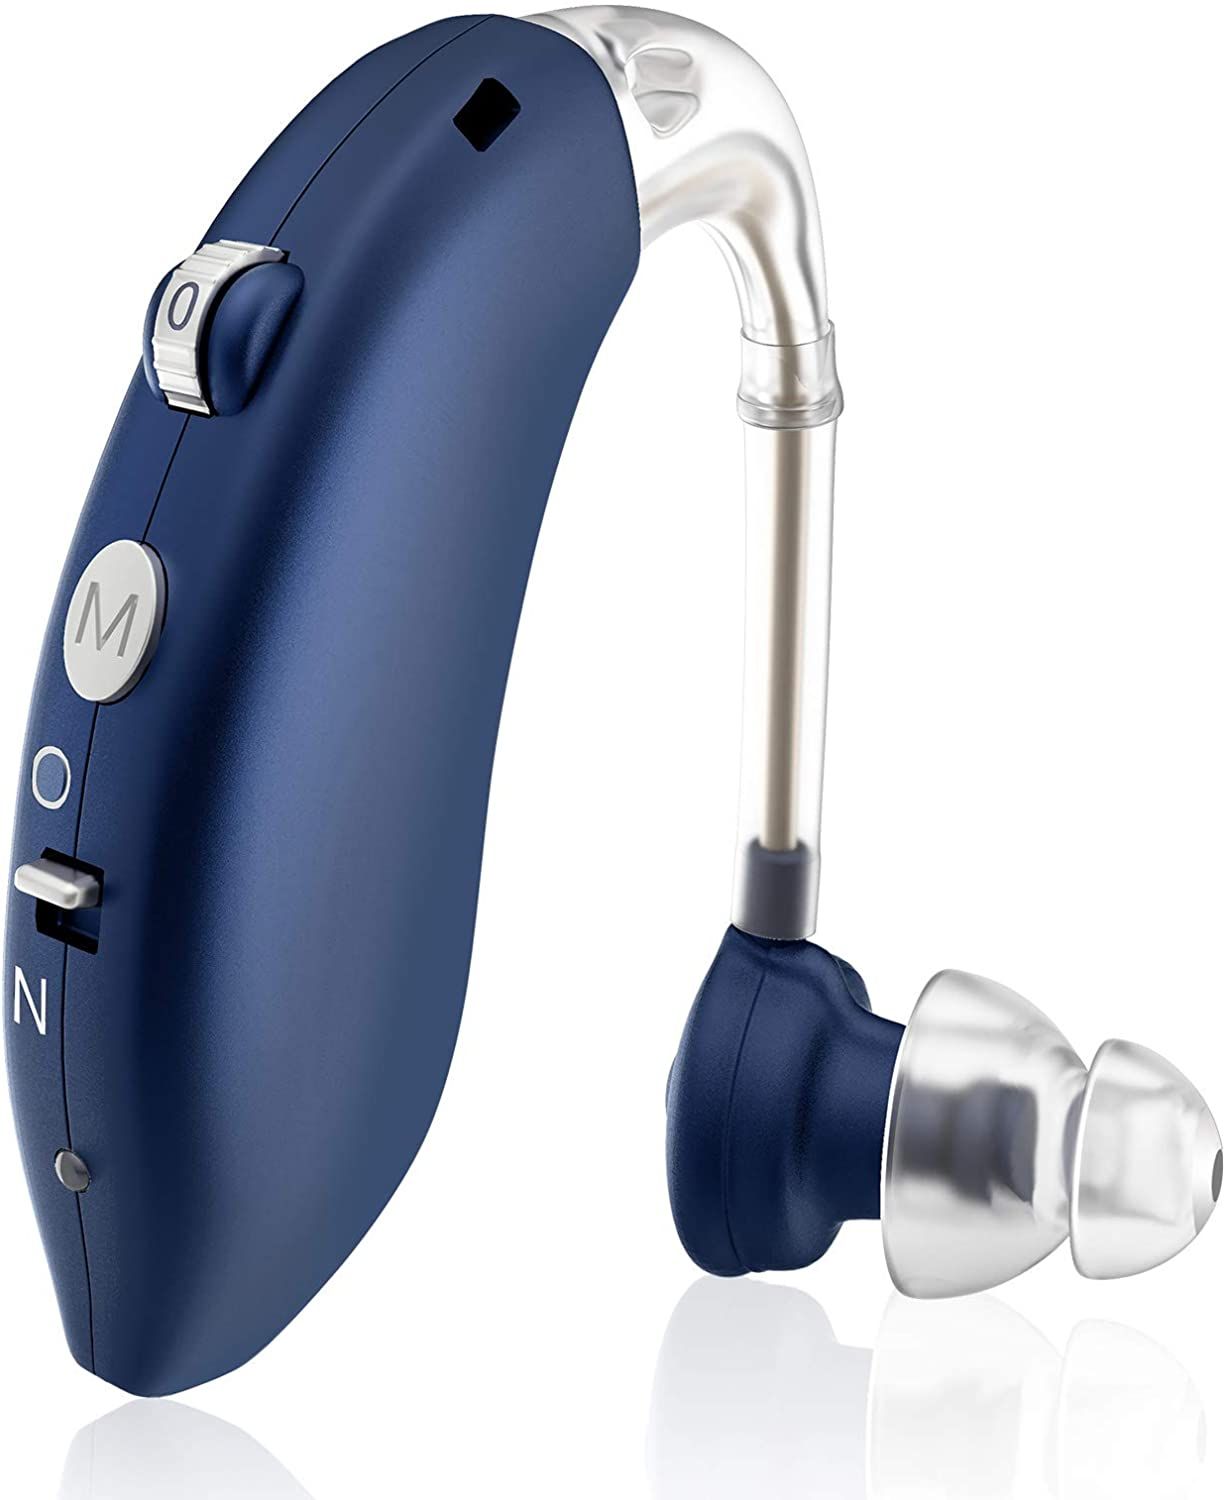 The 10 Best Hearing Aids of 2021